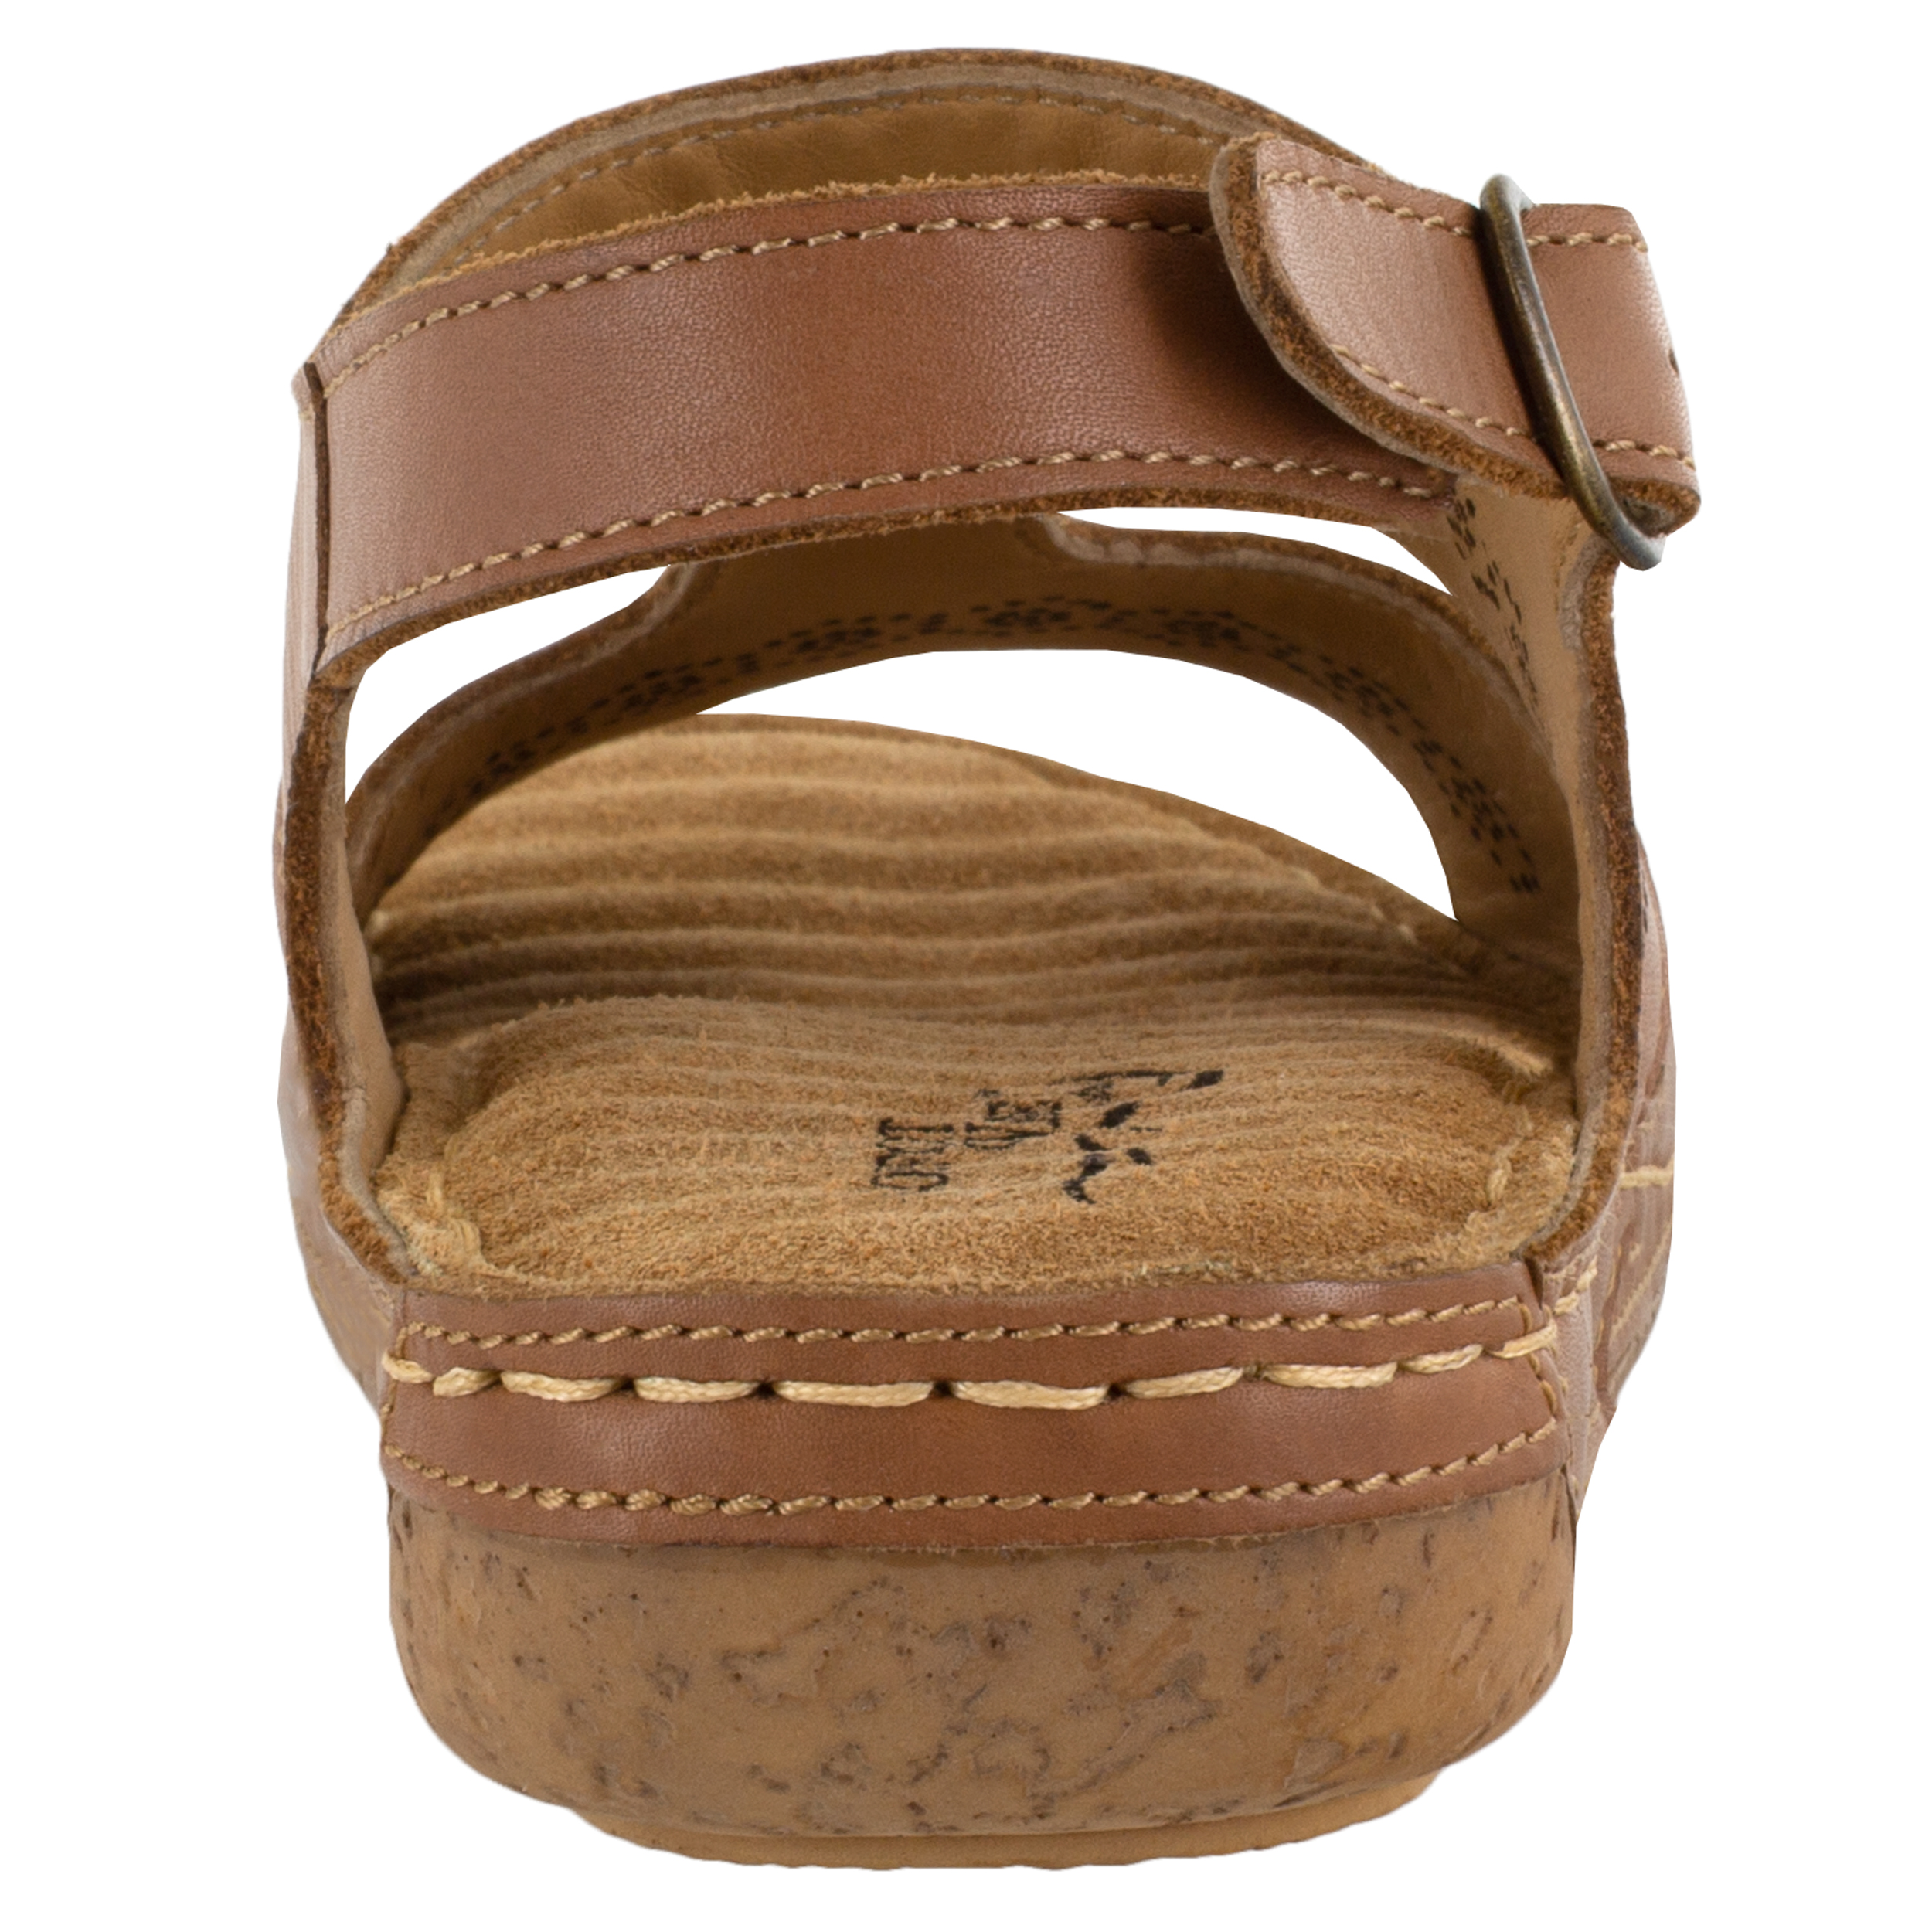 Comfort Wave by Easy Street Sloane Leather Sandals (Women) - image 4 of 7